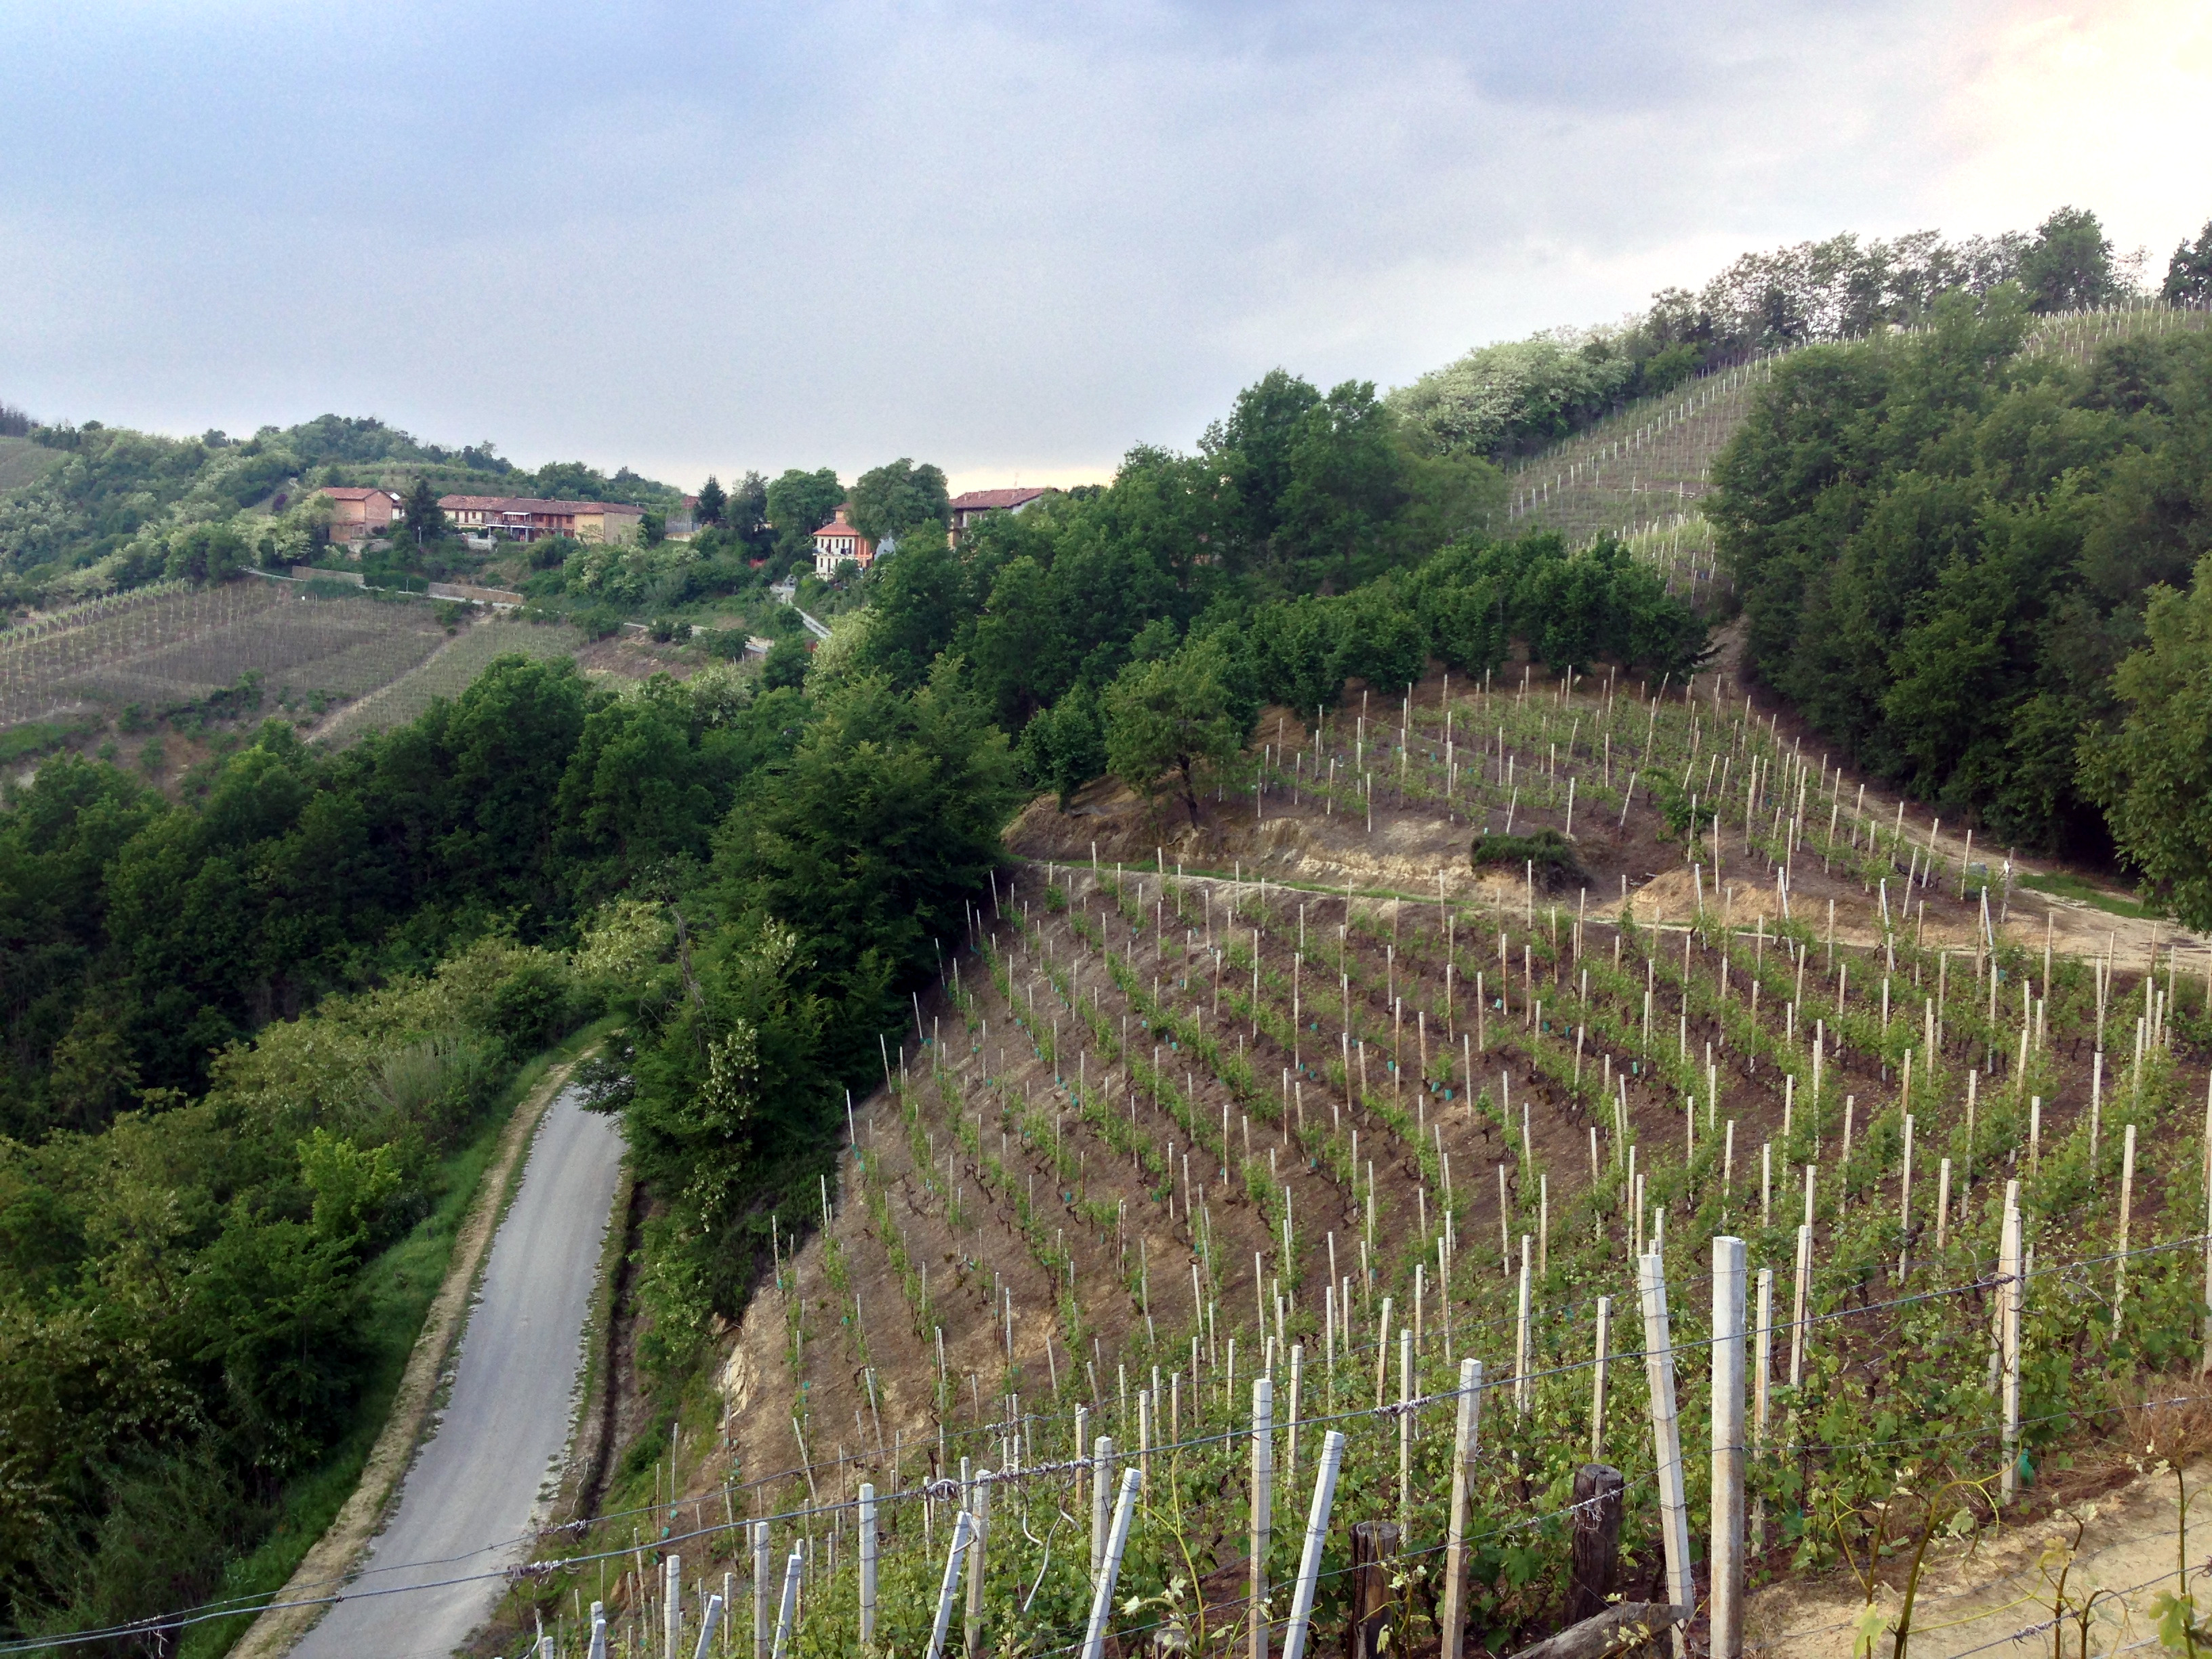 A view of the middle part of Valmaggiore vineyard.